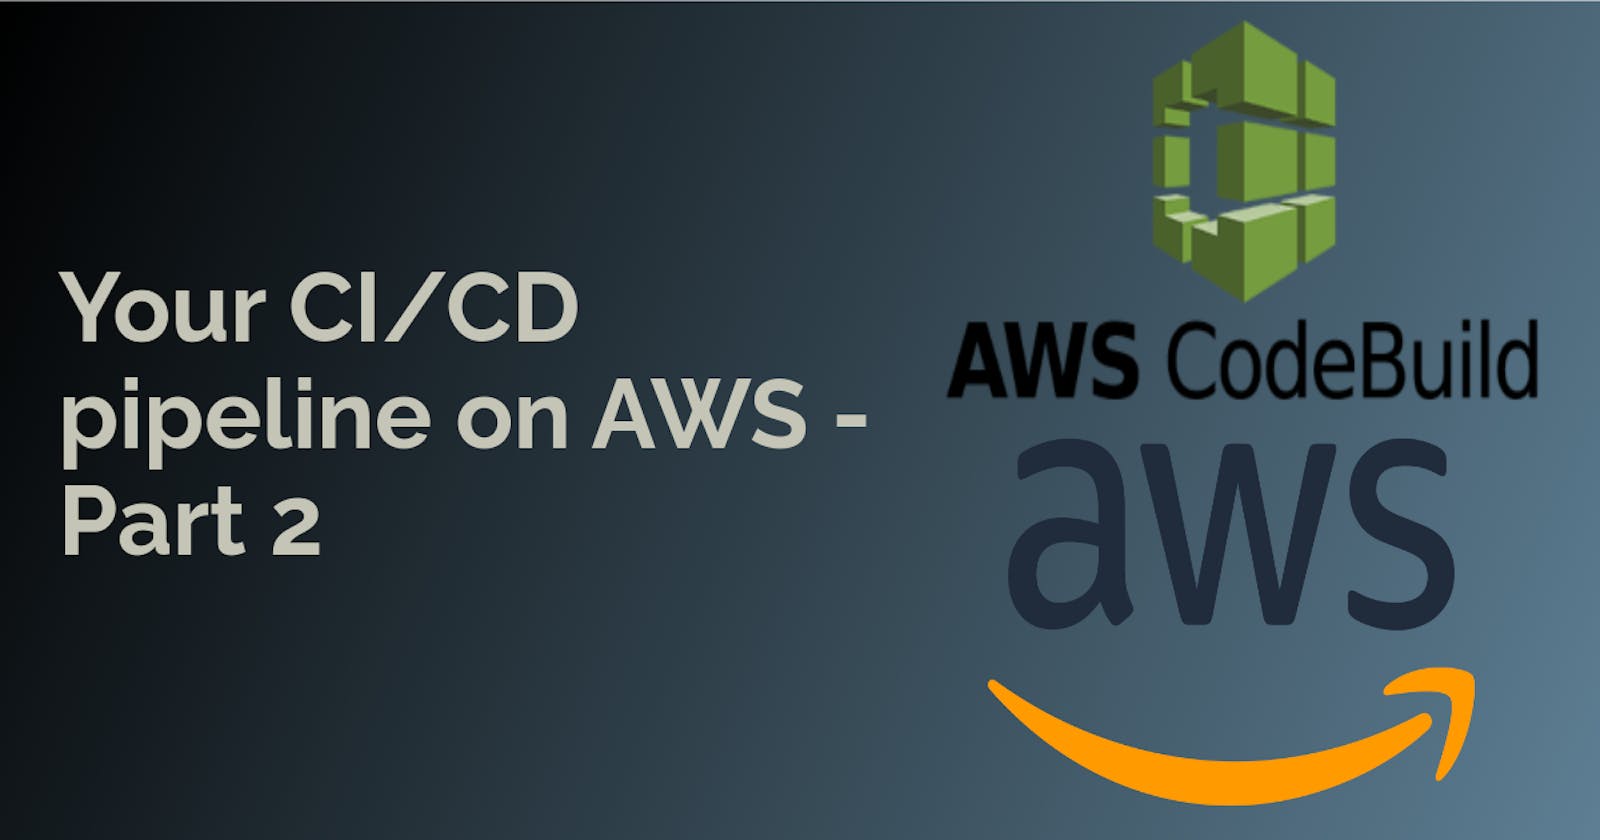 Your CI/CD pipeline on AWS - Part 2